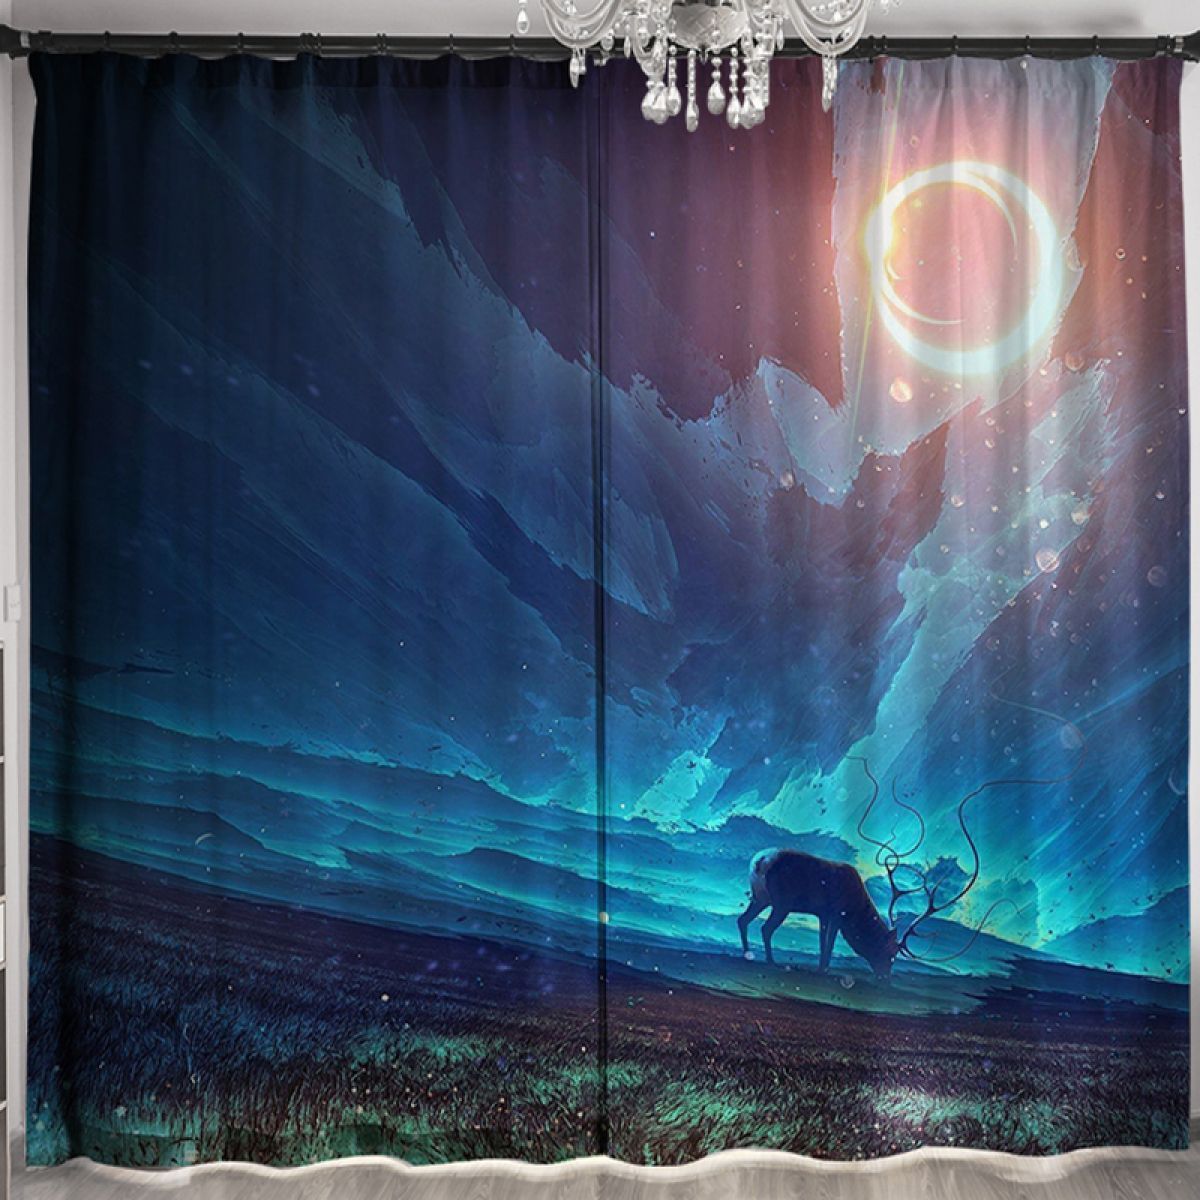 3d Astronaut And Planet Photo Printed Window Curtain Home Decor